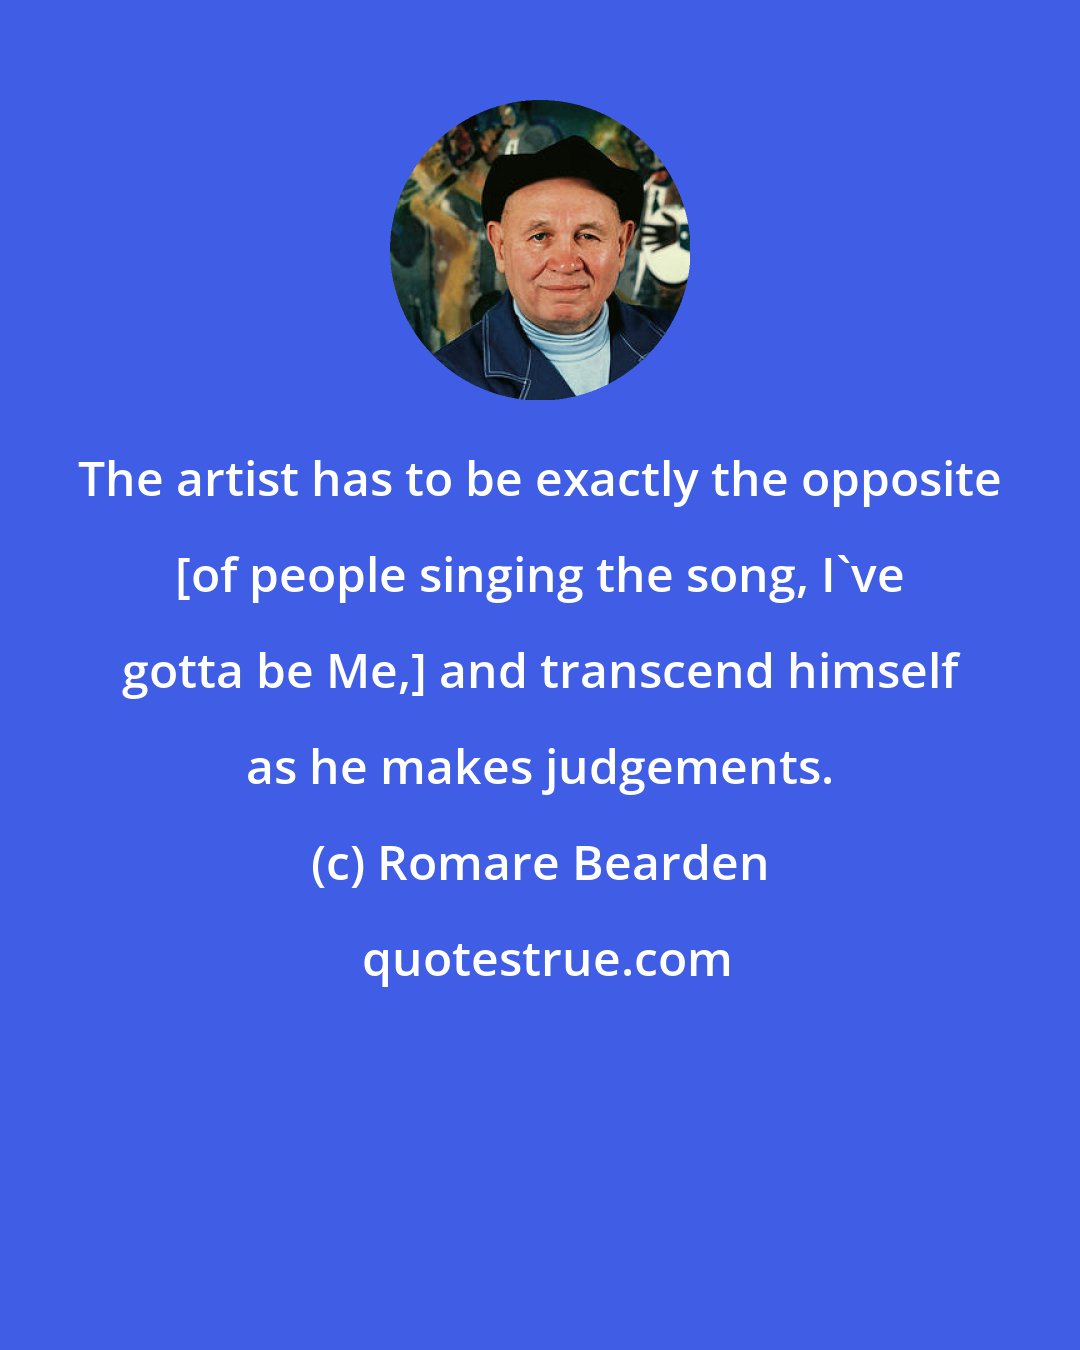 Romare Bearden: The artist has to be exactly the opposite [of people singing the song, I've gotta be Me,] and transcend himself as he makes judgements.